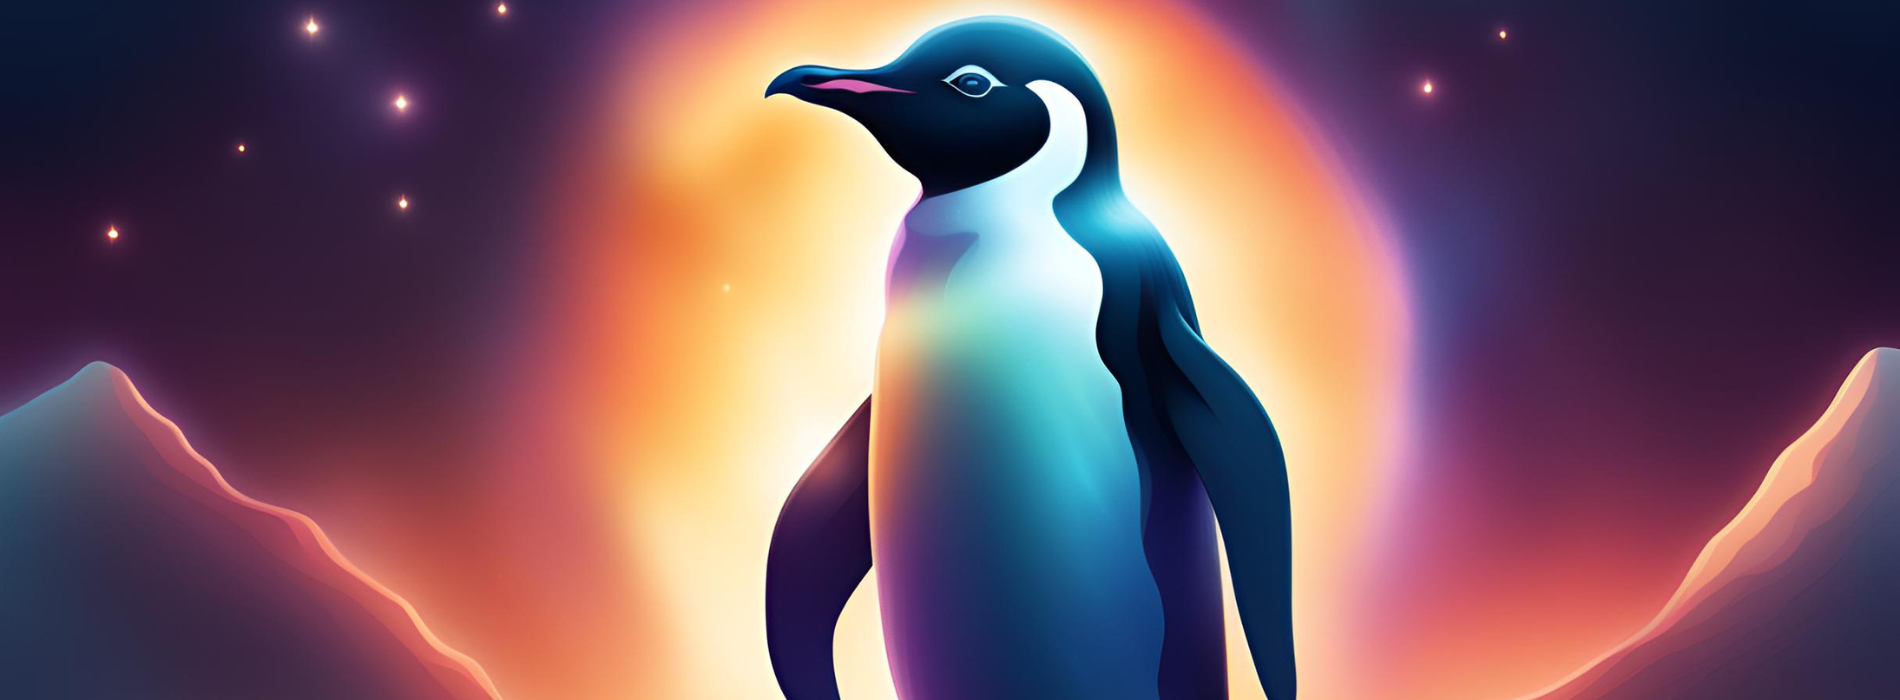 What does "penguin" mean spiritually?